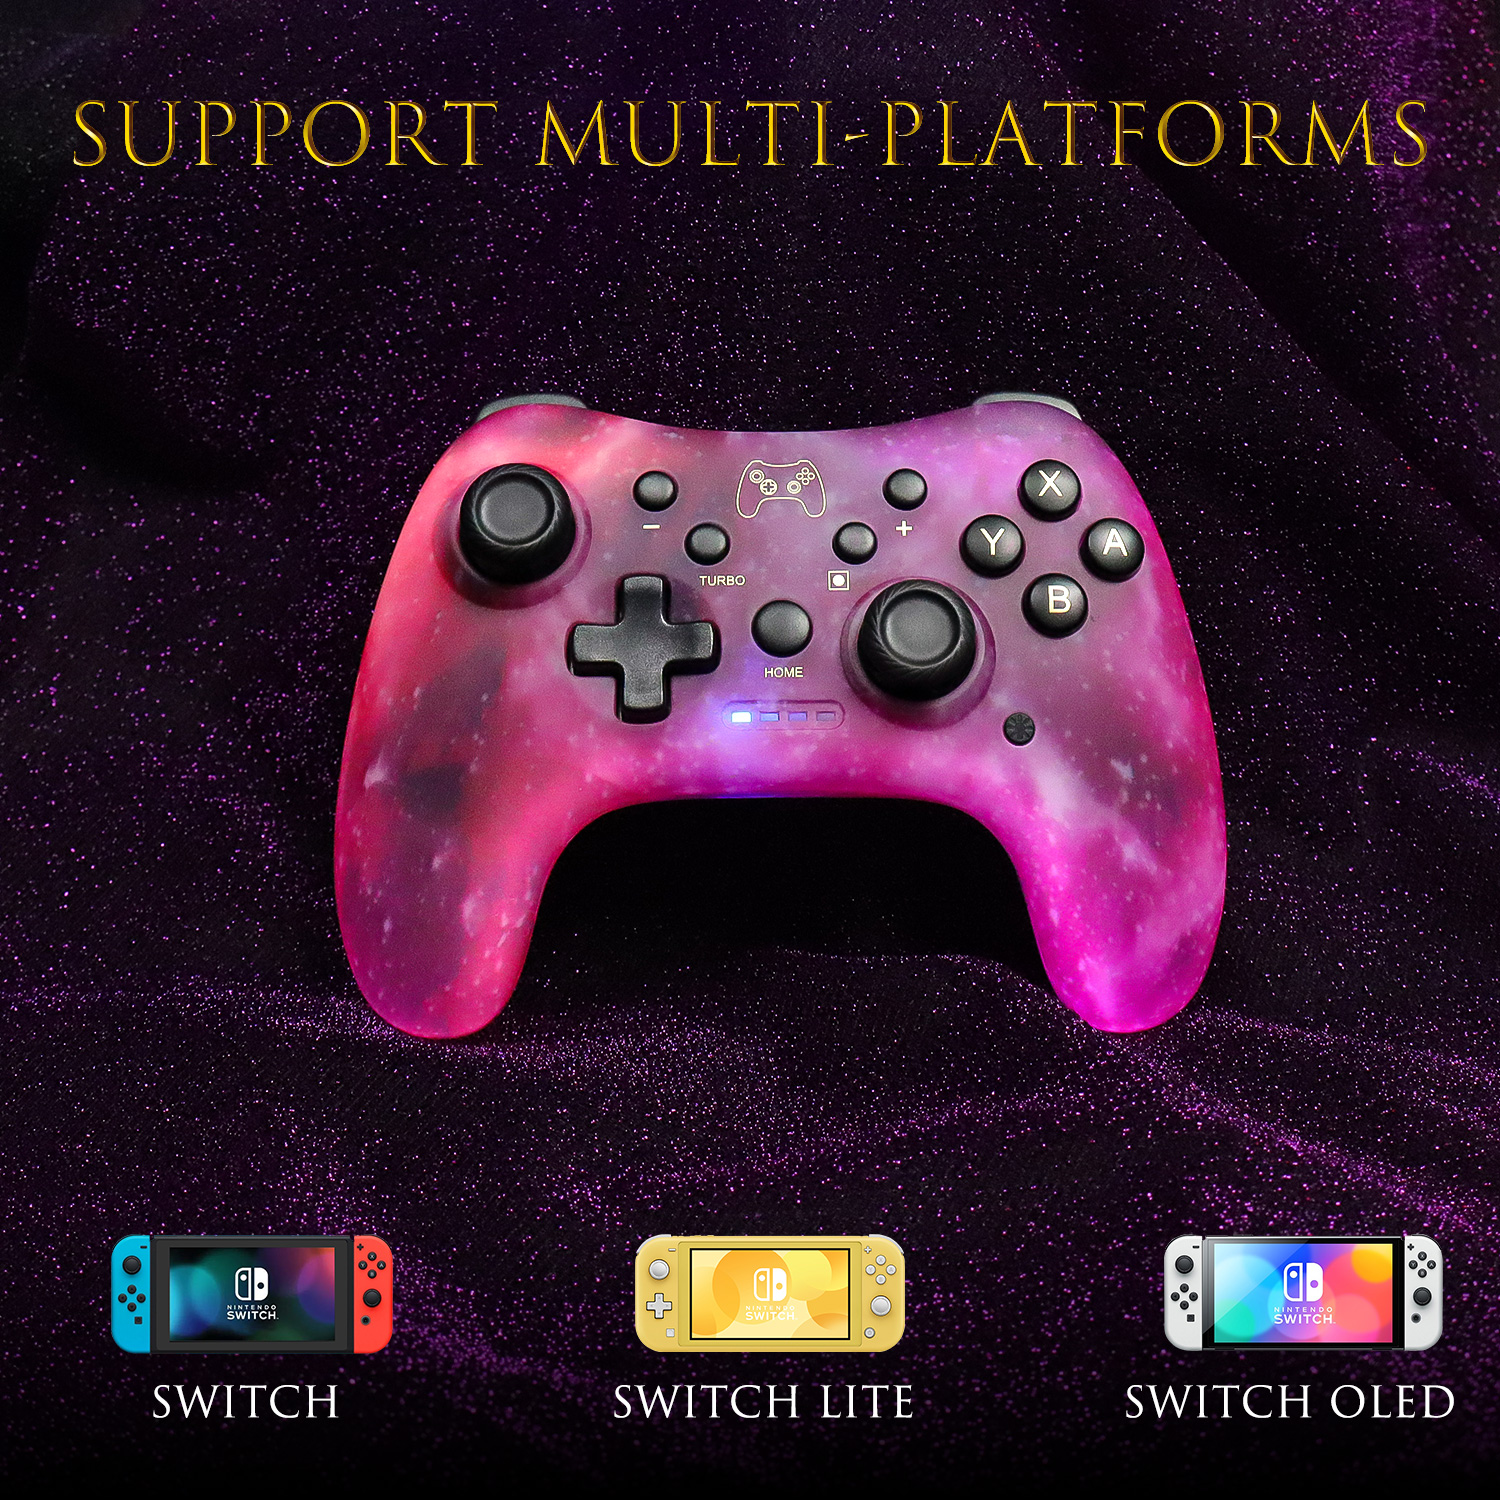 FIEHDUW Switch Pro Controller Compatible for Nintendo Switch/Lite/OLED/Android/iOS/PC, Wireless Switch Controller with TURBO, Wake-up, 6-Axis Gyro, 3 Levels Vibration, and 8 Colors LED (Cosmic Nebula)